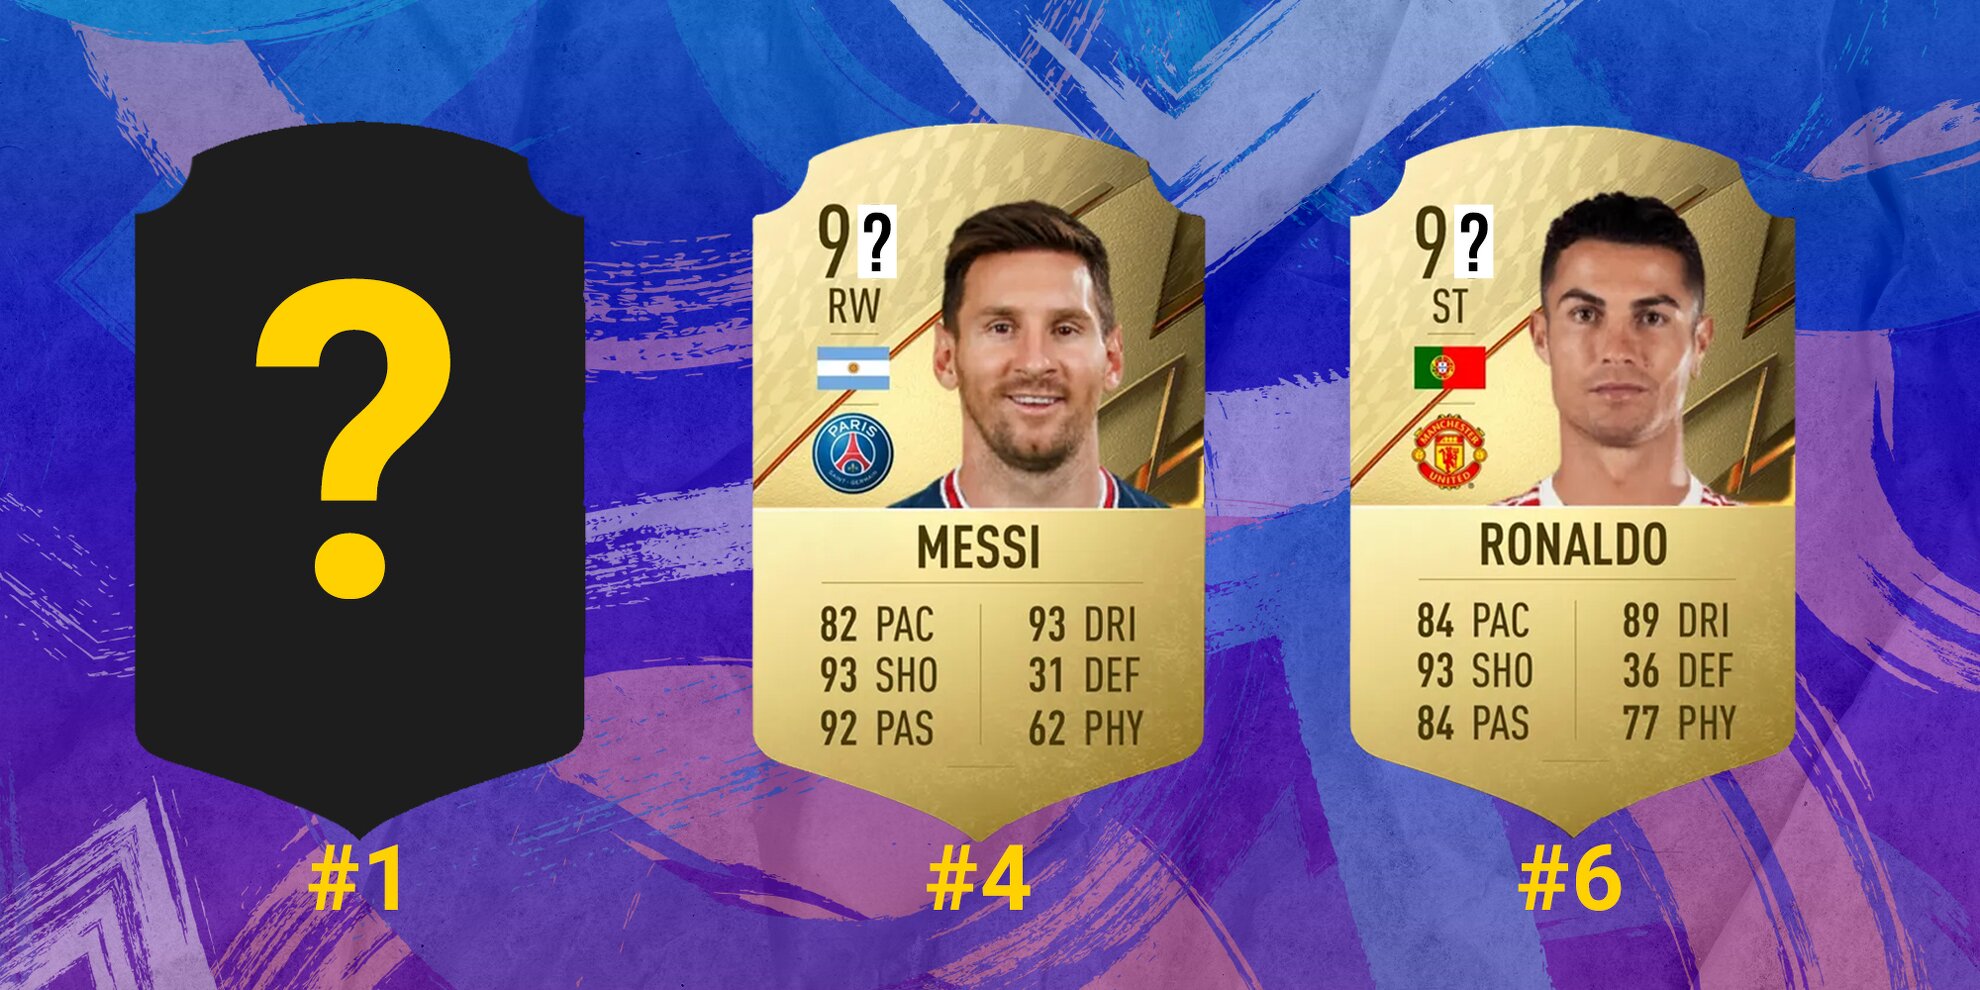 Who are the top 40 highest rated players on FIFA 23?